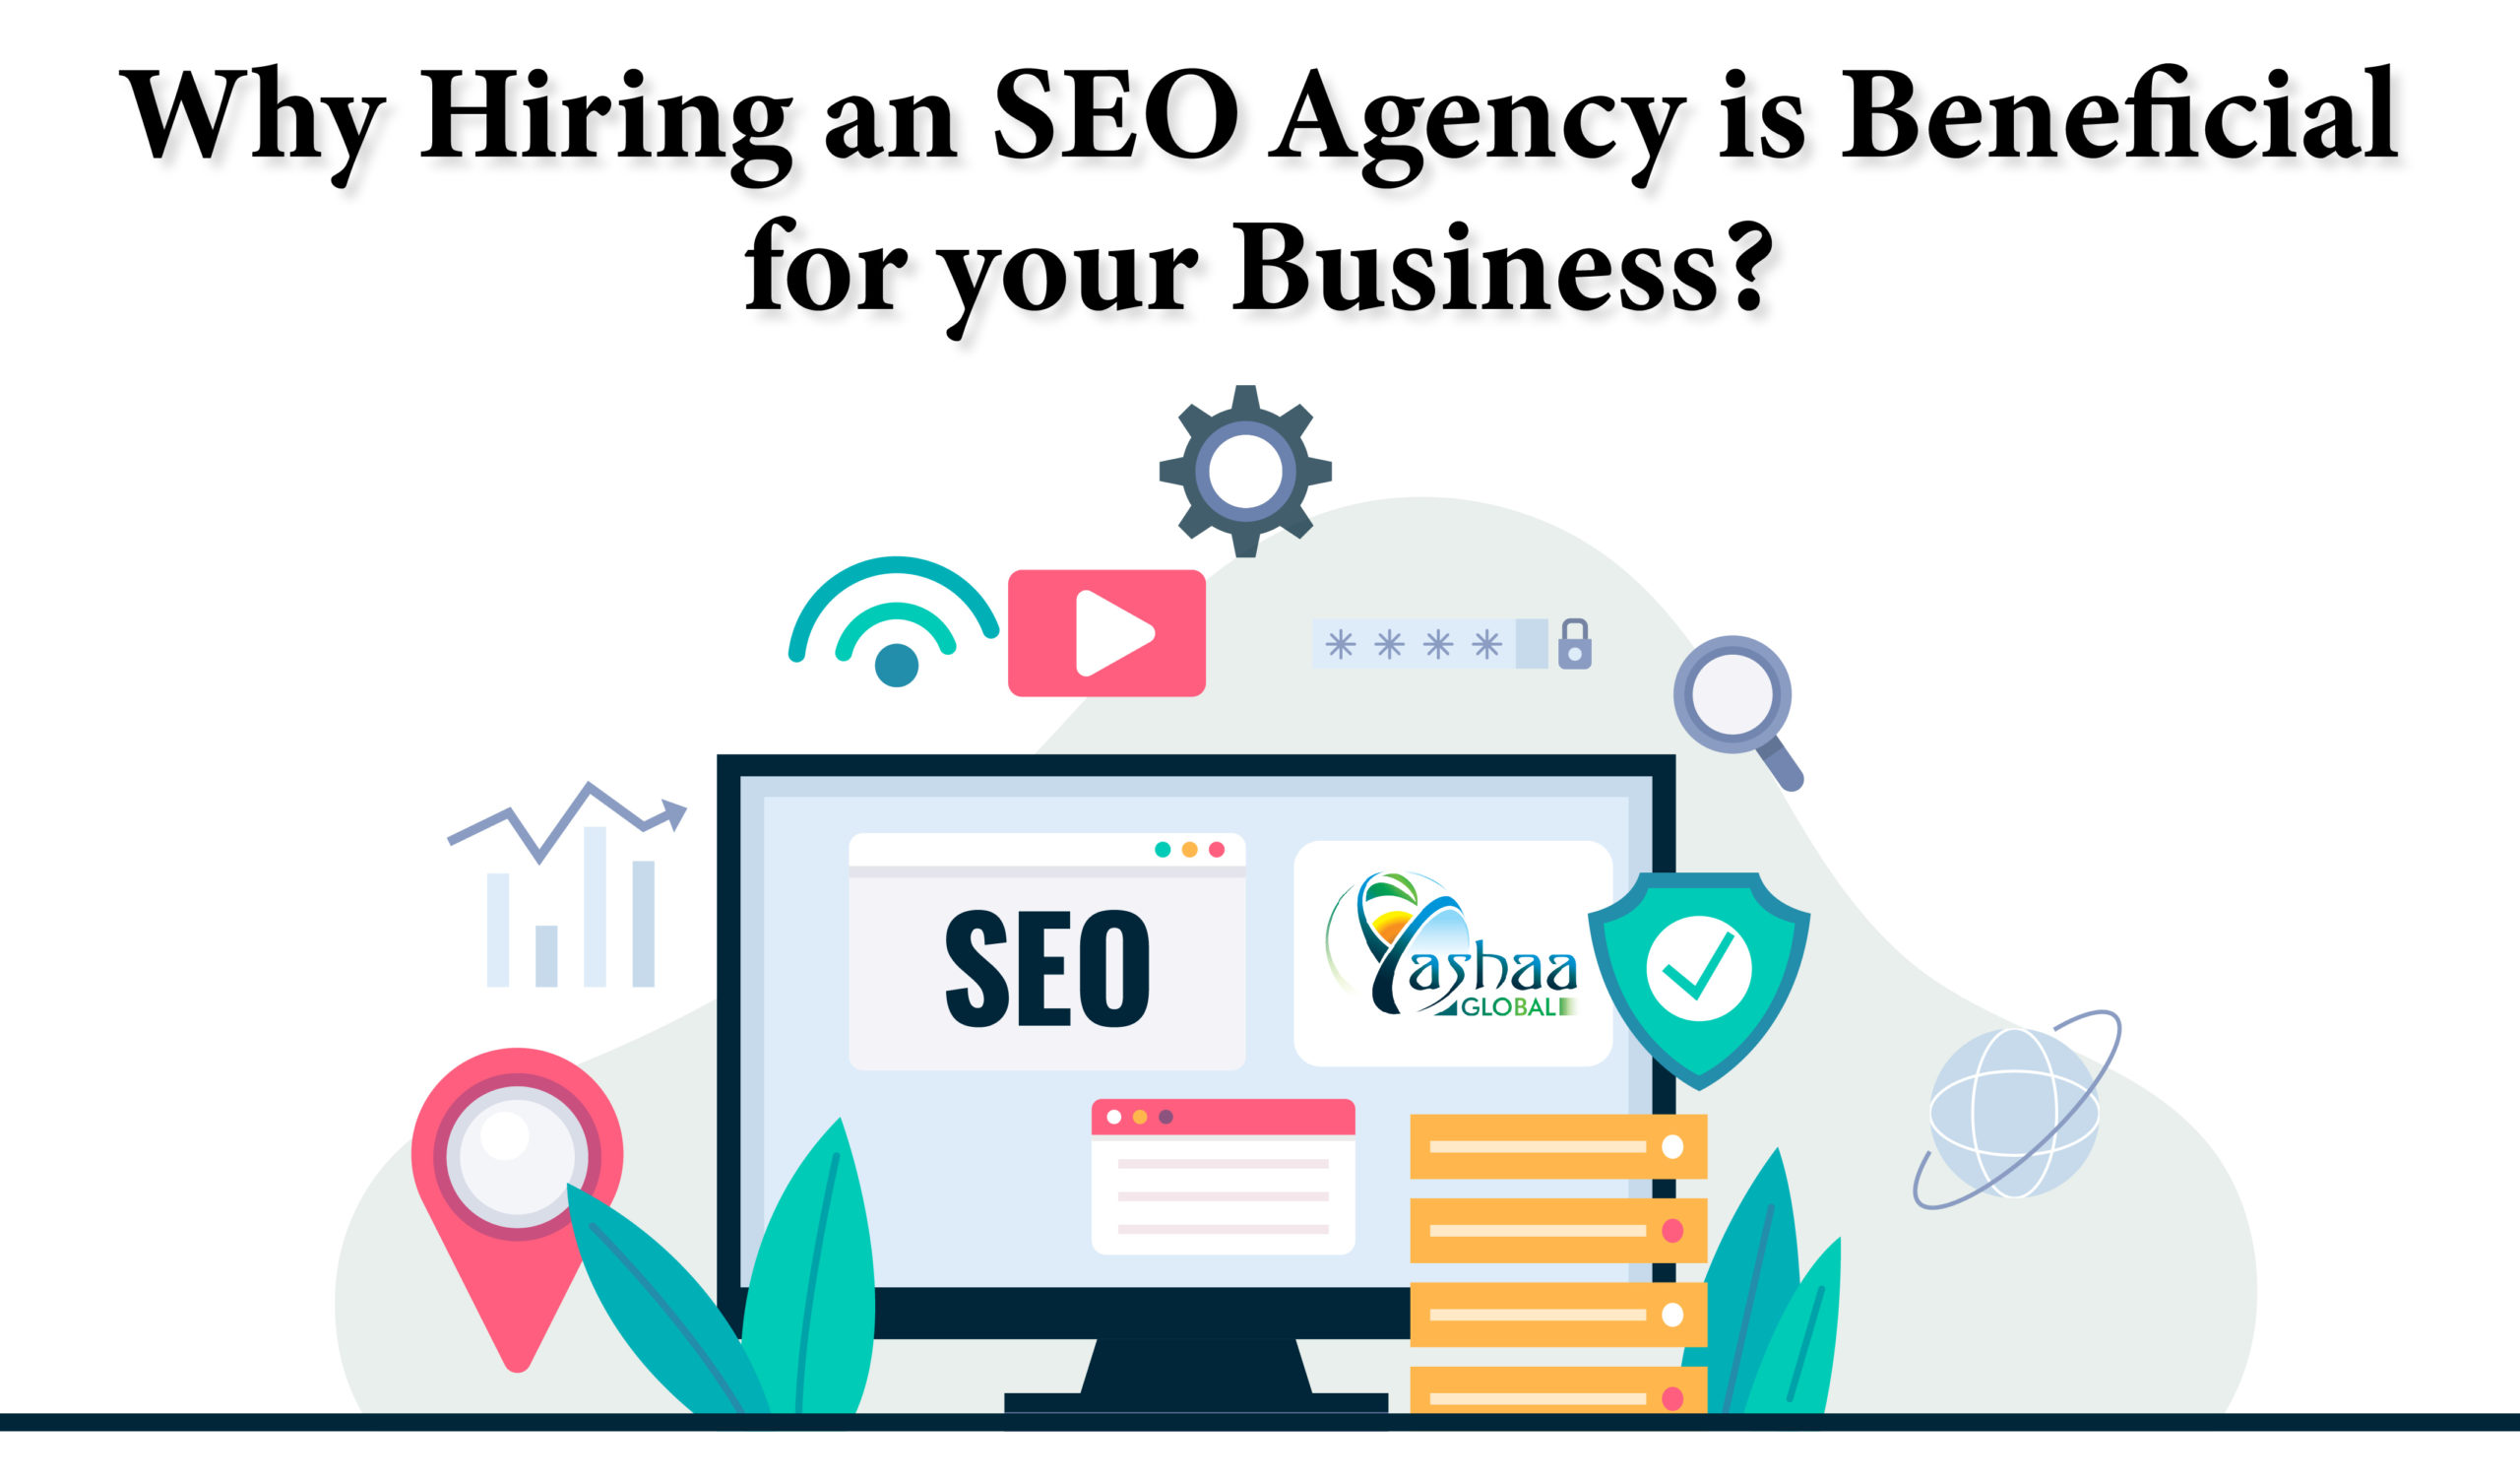 Why hiring an SEO agency is beneficial for your business?